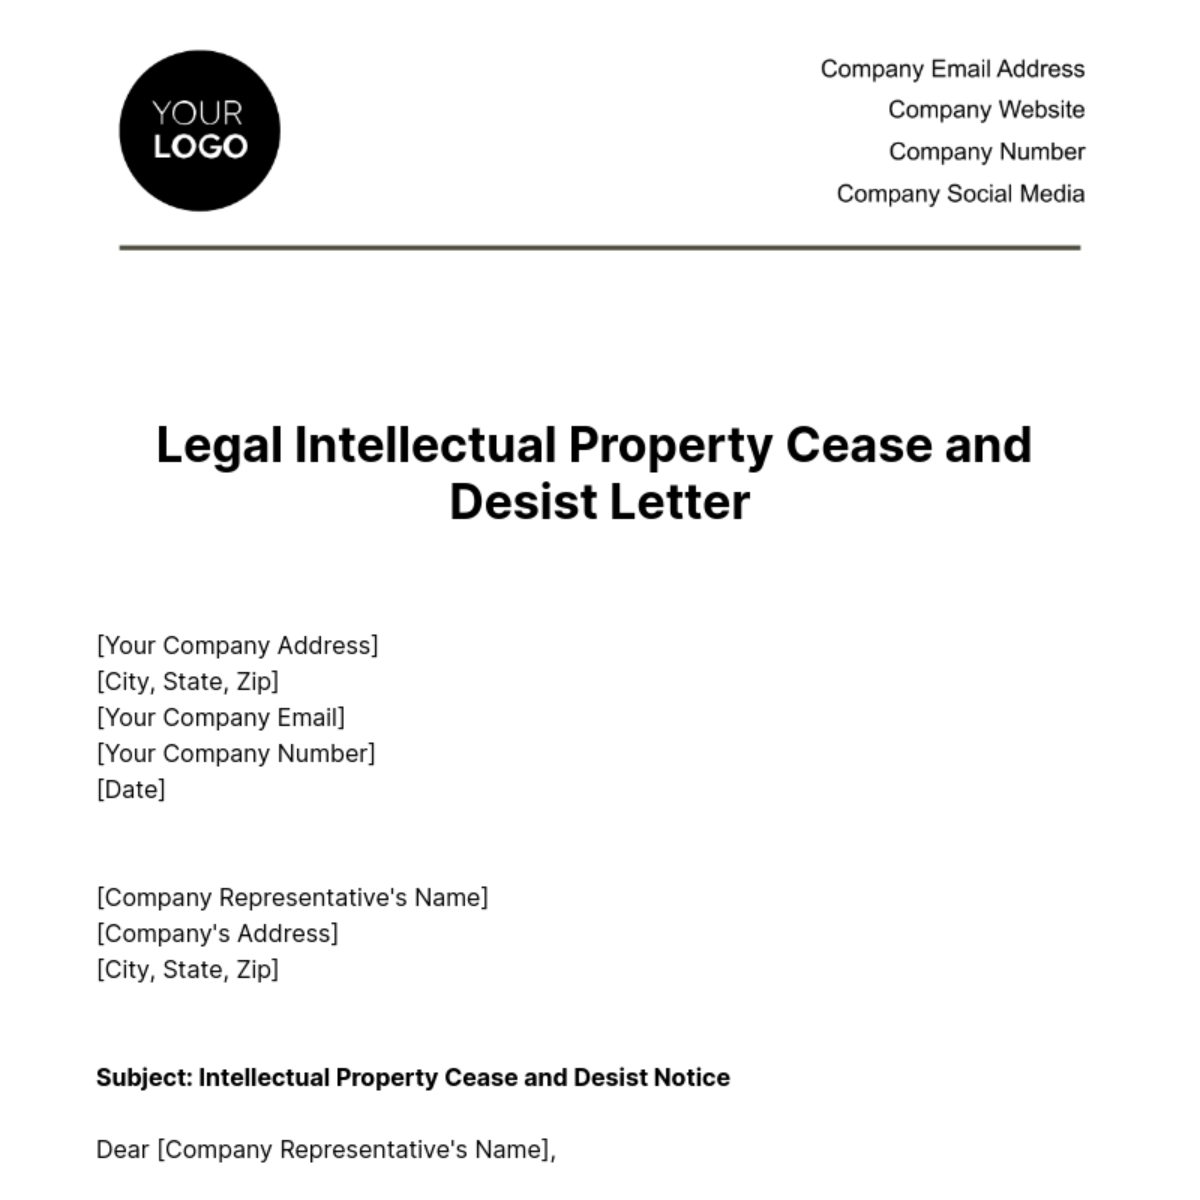 Free Legal Intellectual Property Cease and Desist Letter Template